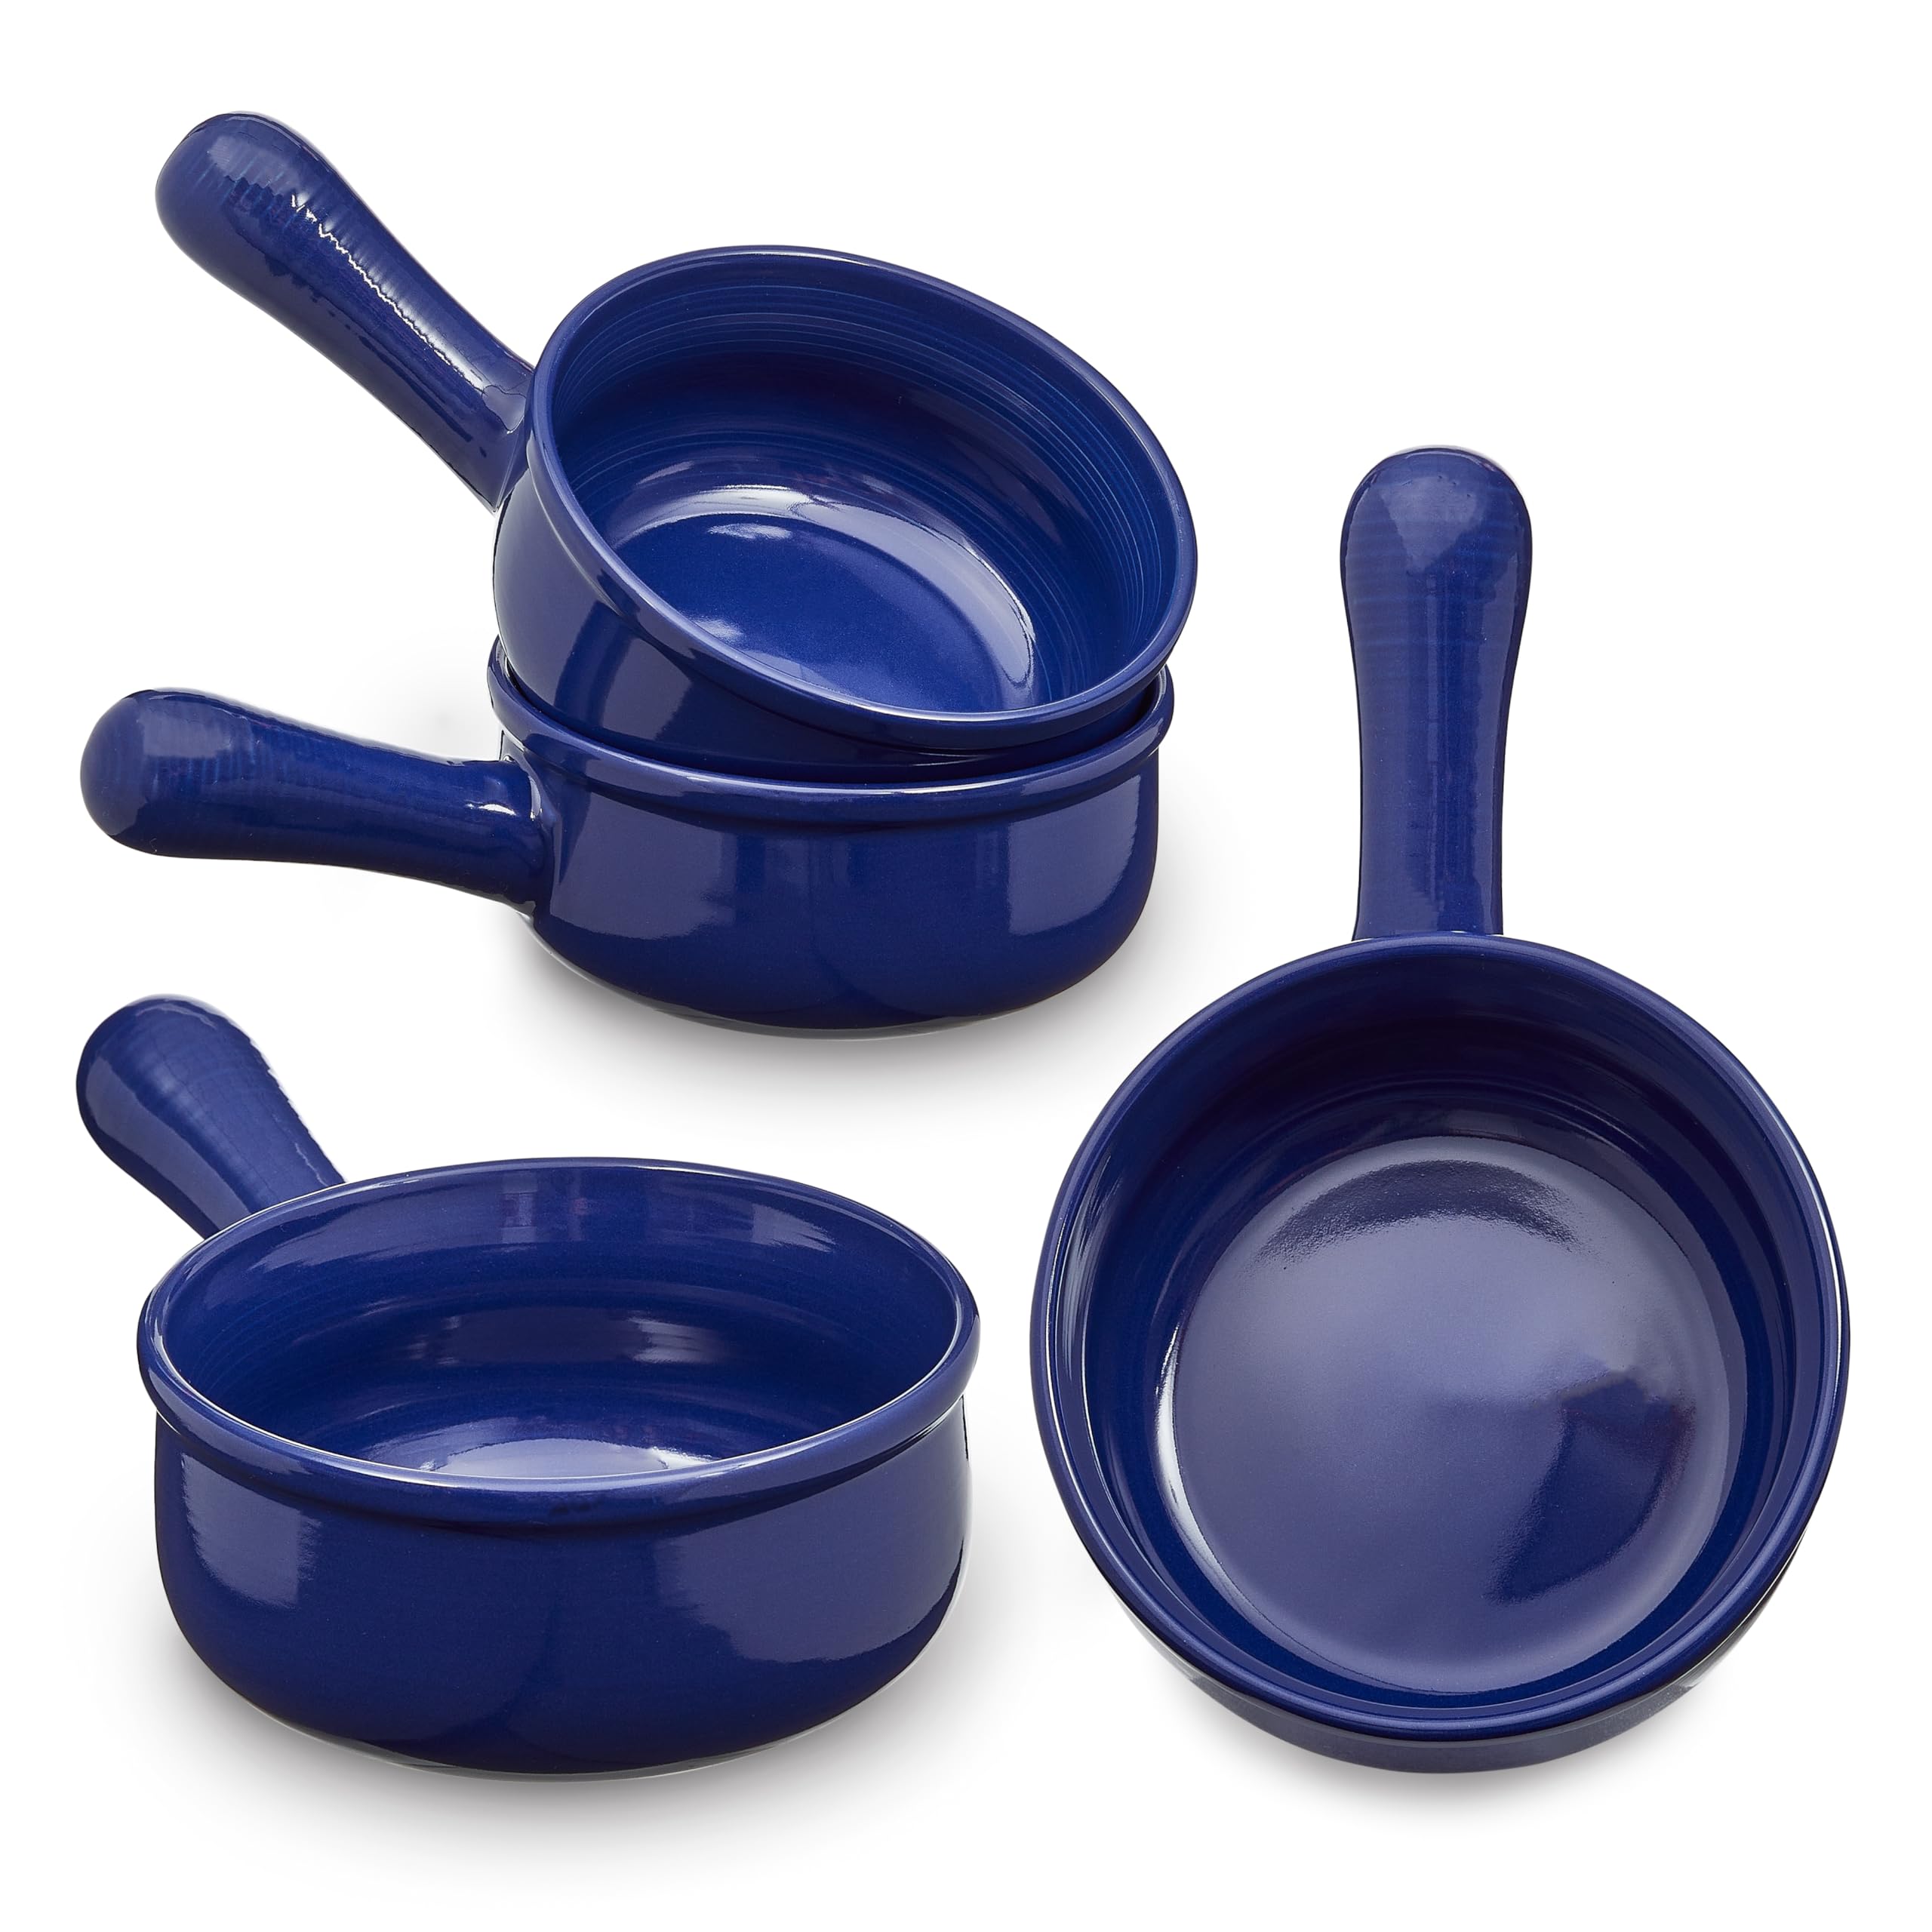 Sheffield Home Set of Ceramic Soup Bowls with Handles Serving Bowls, Dishwasher, Microwave and Oven Safe  - Like New